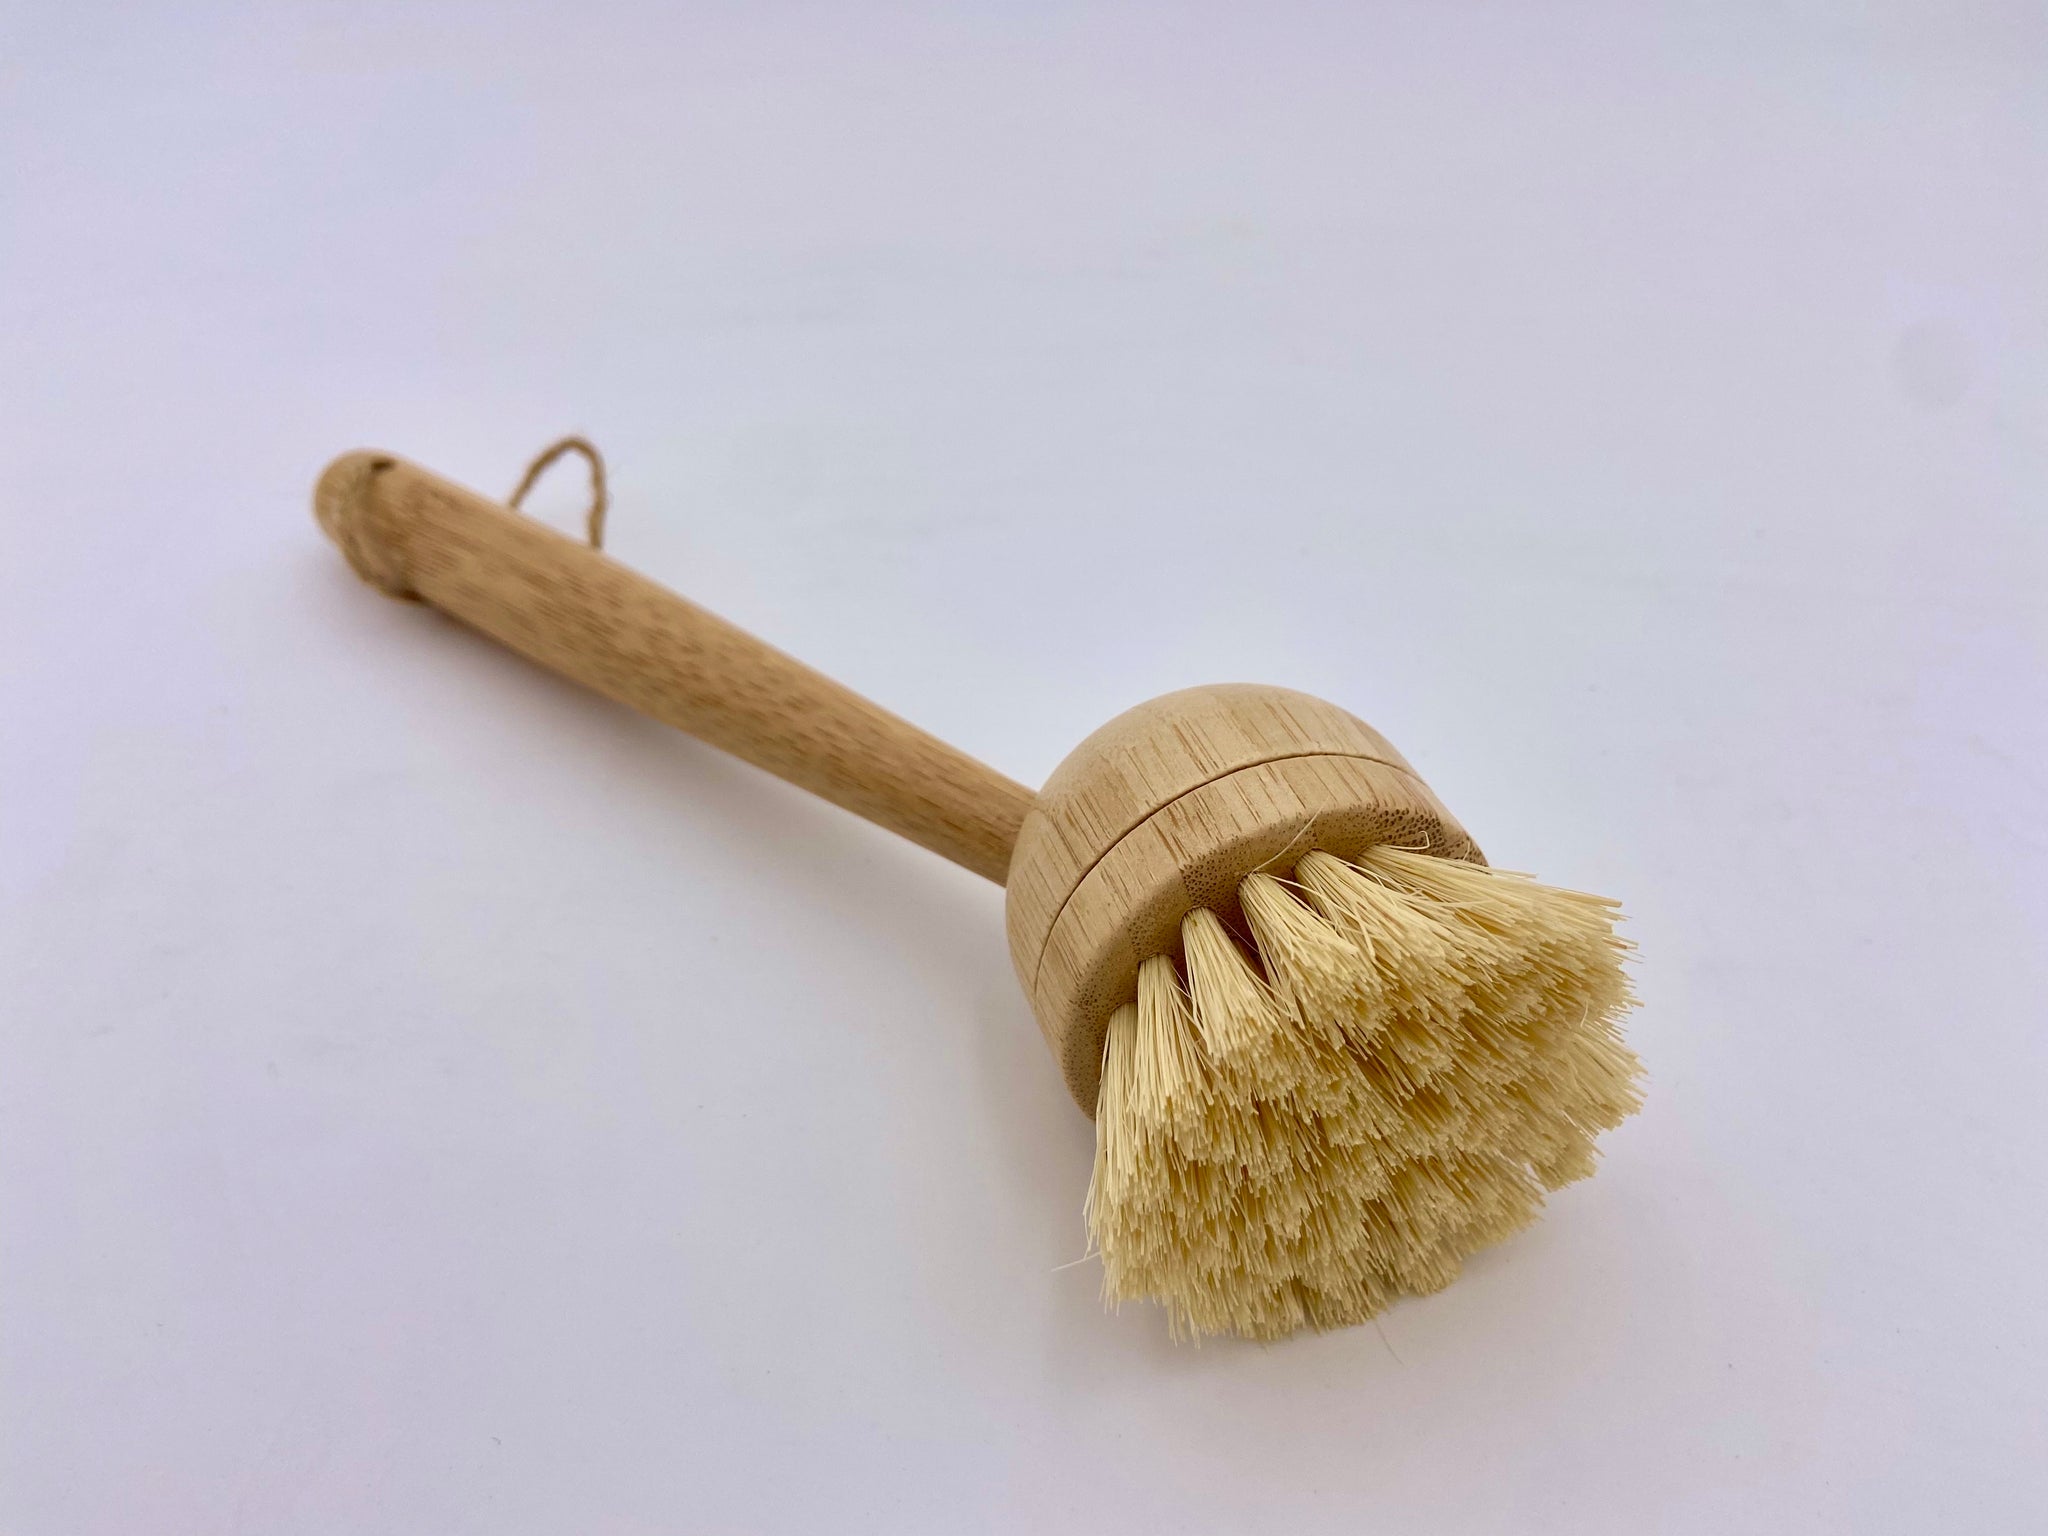 Replacement Brush Heads for Bamboo Dish Brush (4 Pack) - Jungle Culture